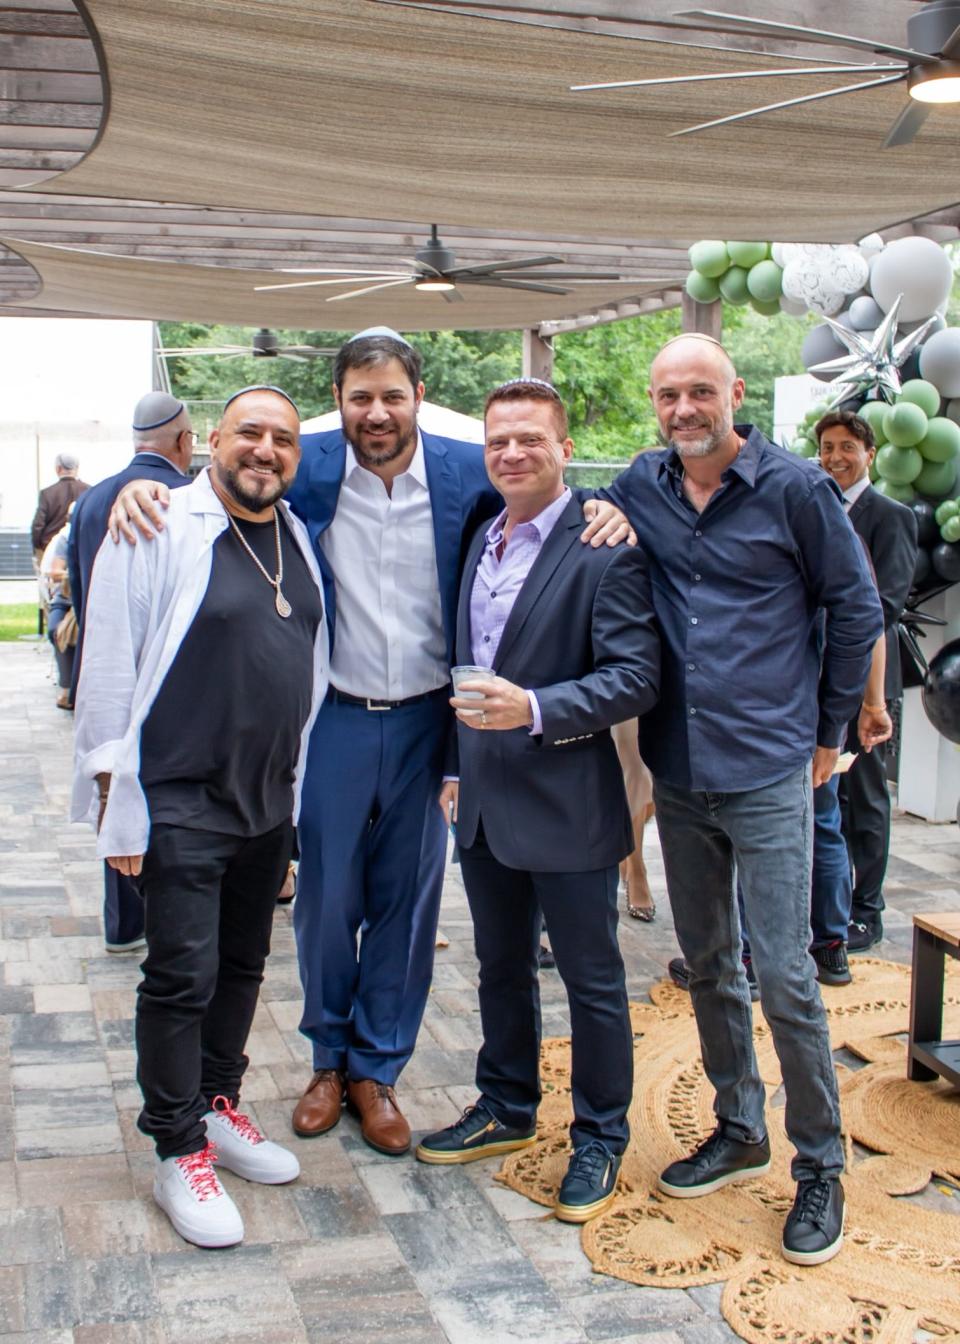 Rabbi Shmuli Novack (second from left) is pictured with David “Papi” Einhorn, Dr. Dmitriy Model and Ryan Shapiro during the June 4 dedication of a new outdoor event space at Chabad of Southside.